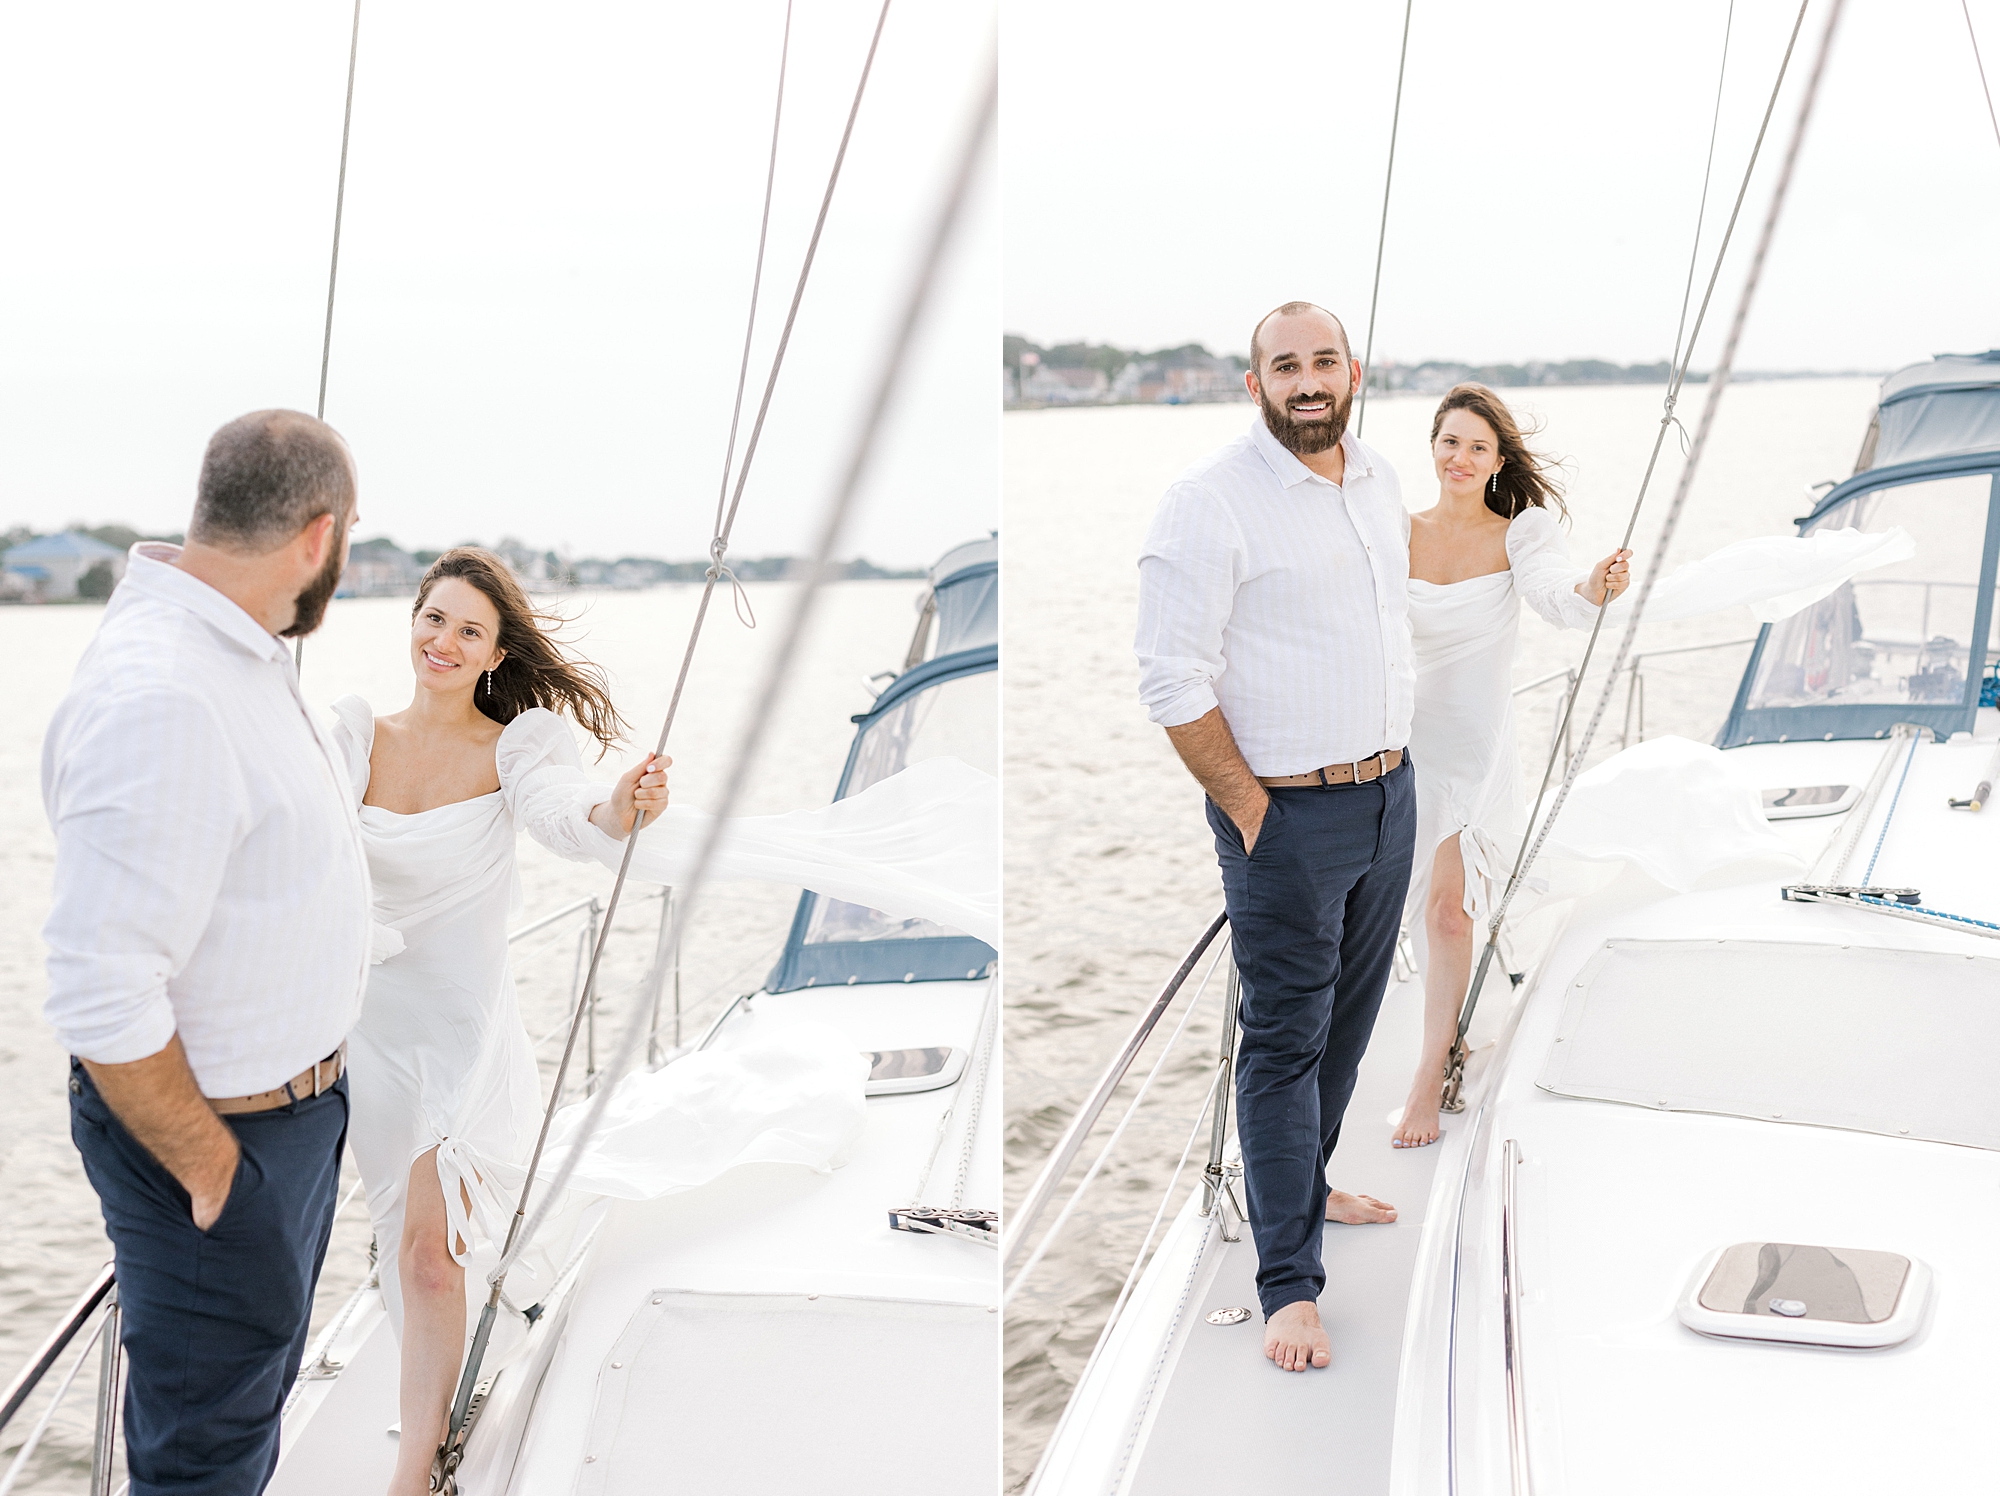 man leads fiancee along boat during engagement photos on water